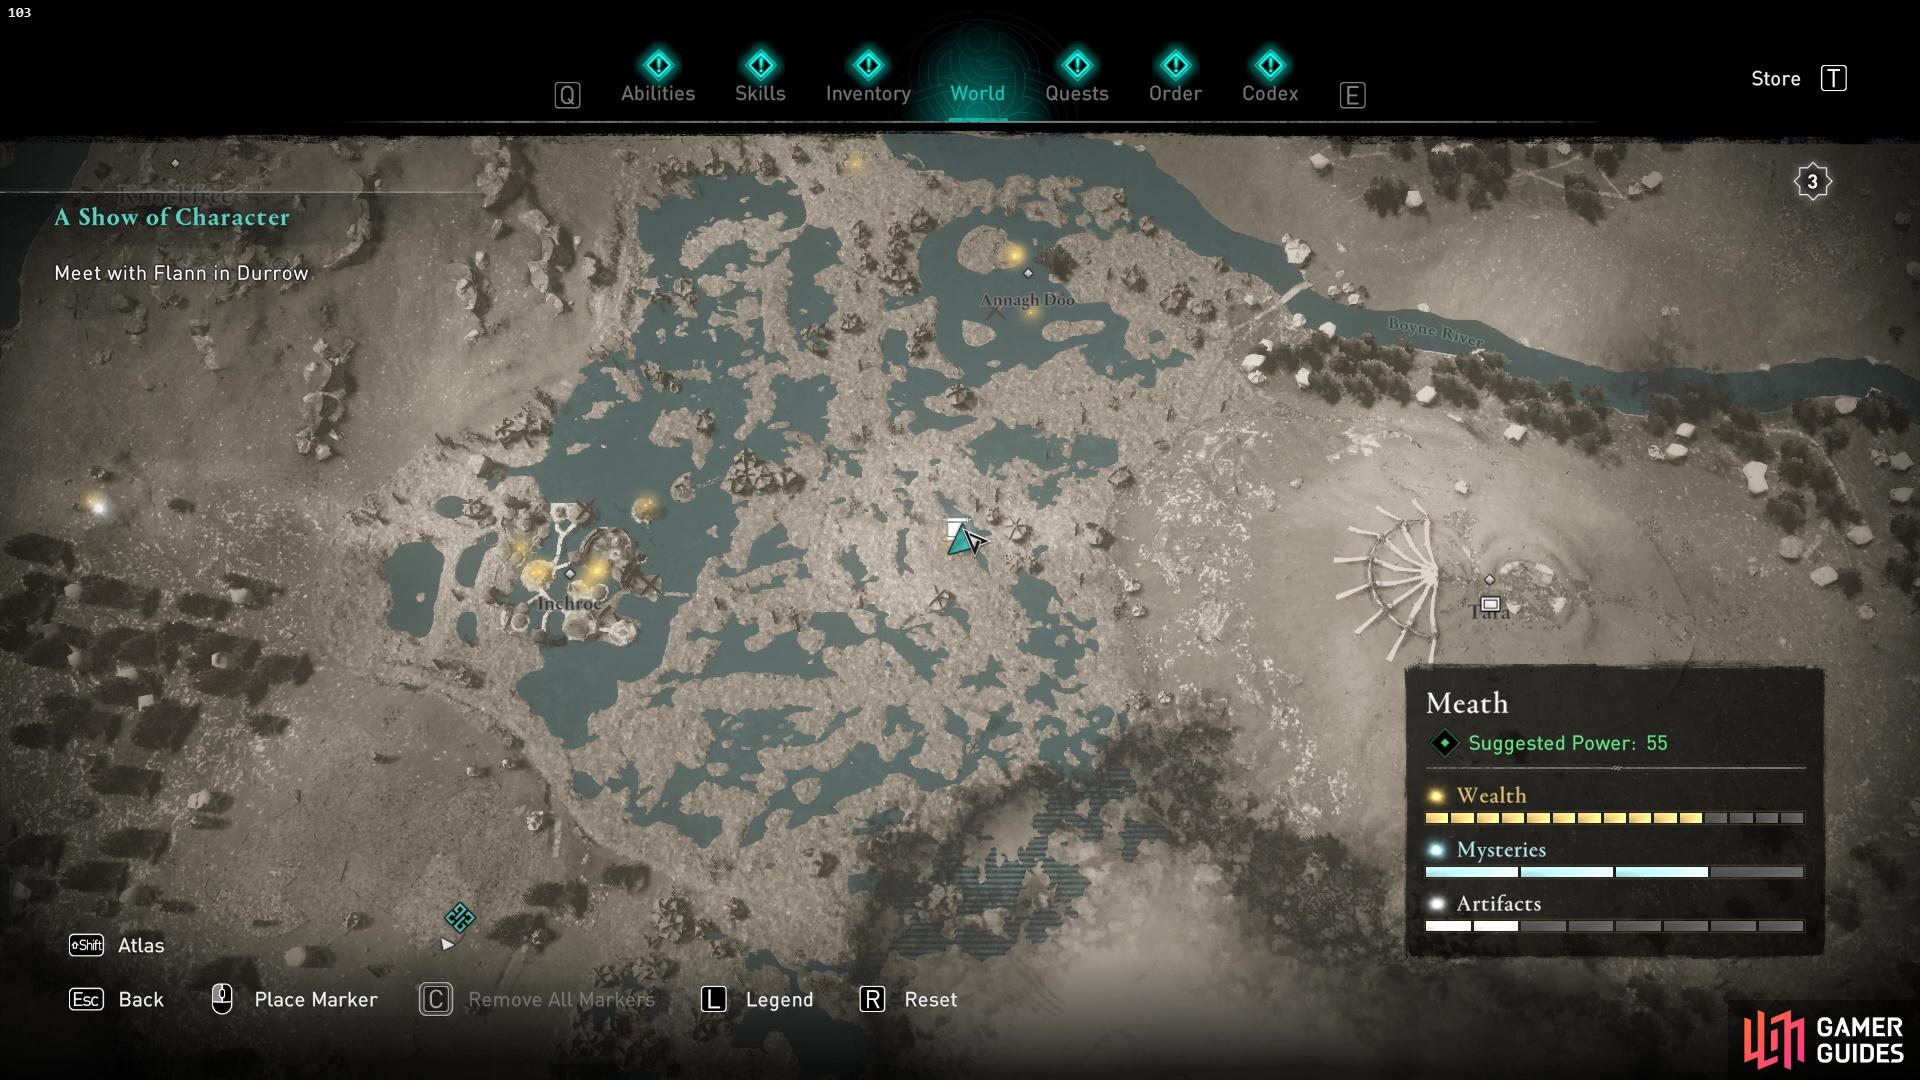 The treasure hoard map is found east of Inchroe